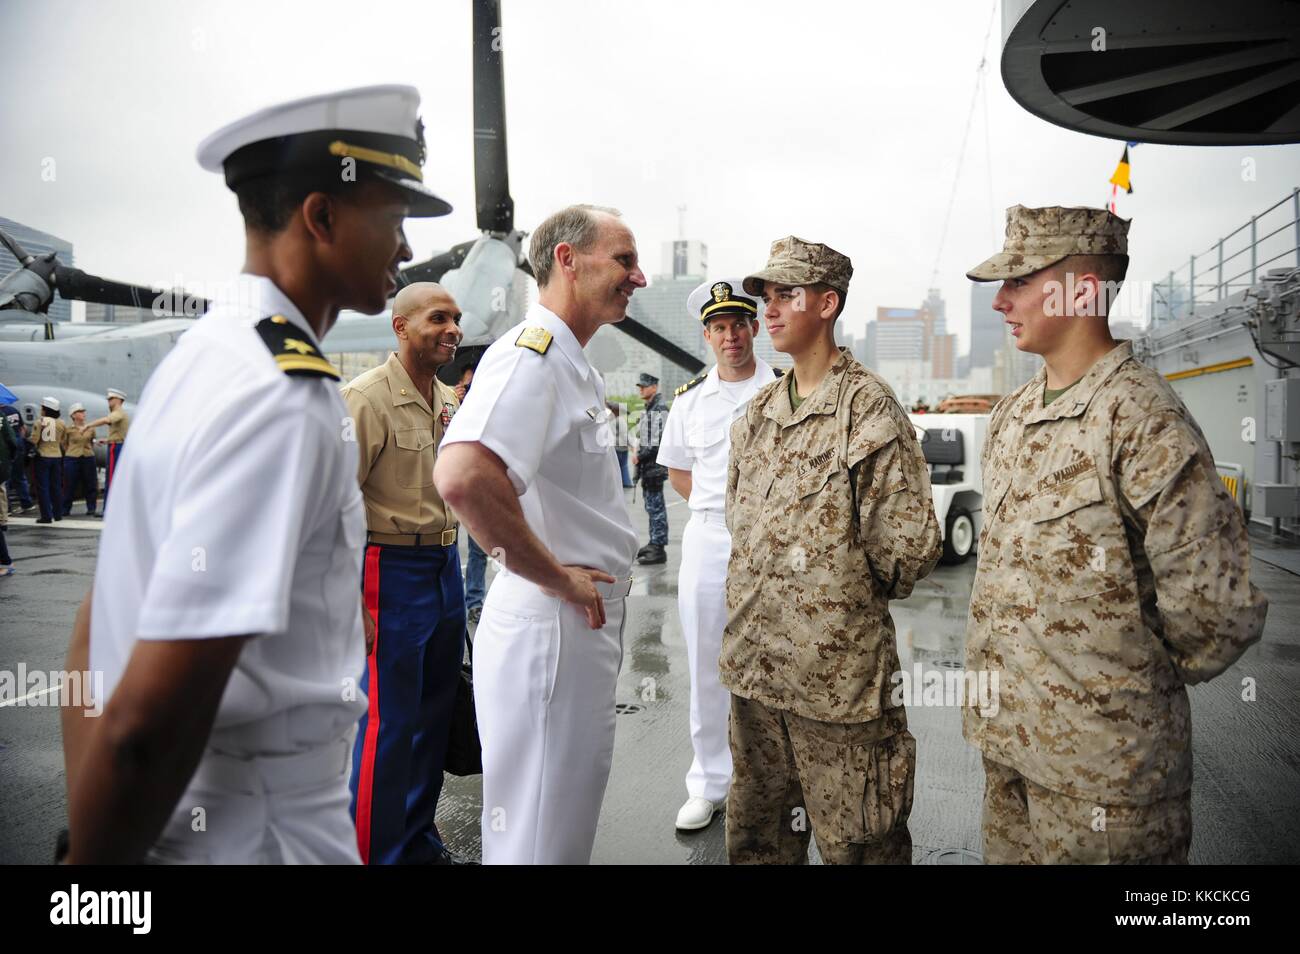 Chief of Naval Operations CNO Admiral Jonathan Greenert meets with Marines aboard the amphibious assault ship USS Wasp LHD 1 during Fleet Week New York 2012, New York. Image courtesy Mass Communication Specialist 1st Class Peter D. Lawlor/US Navy. 2012. Stock Photo